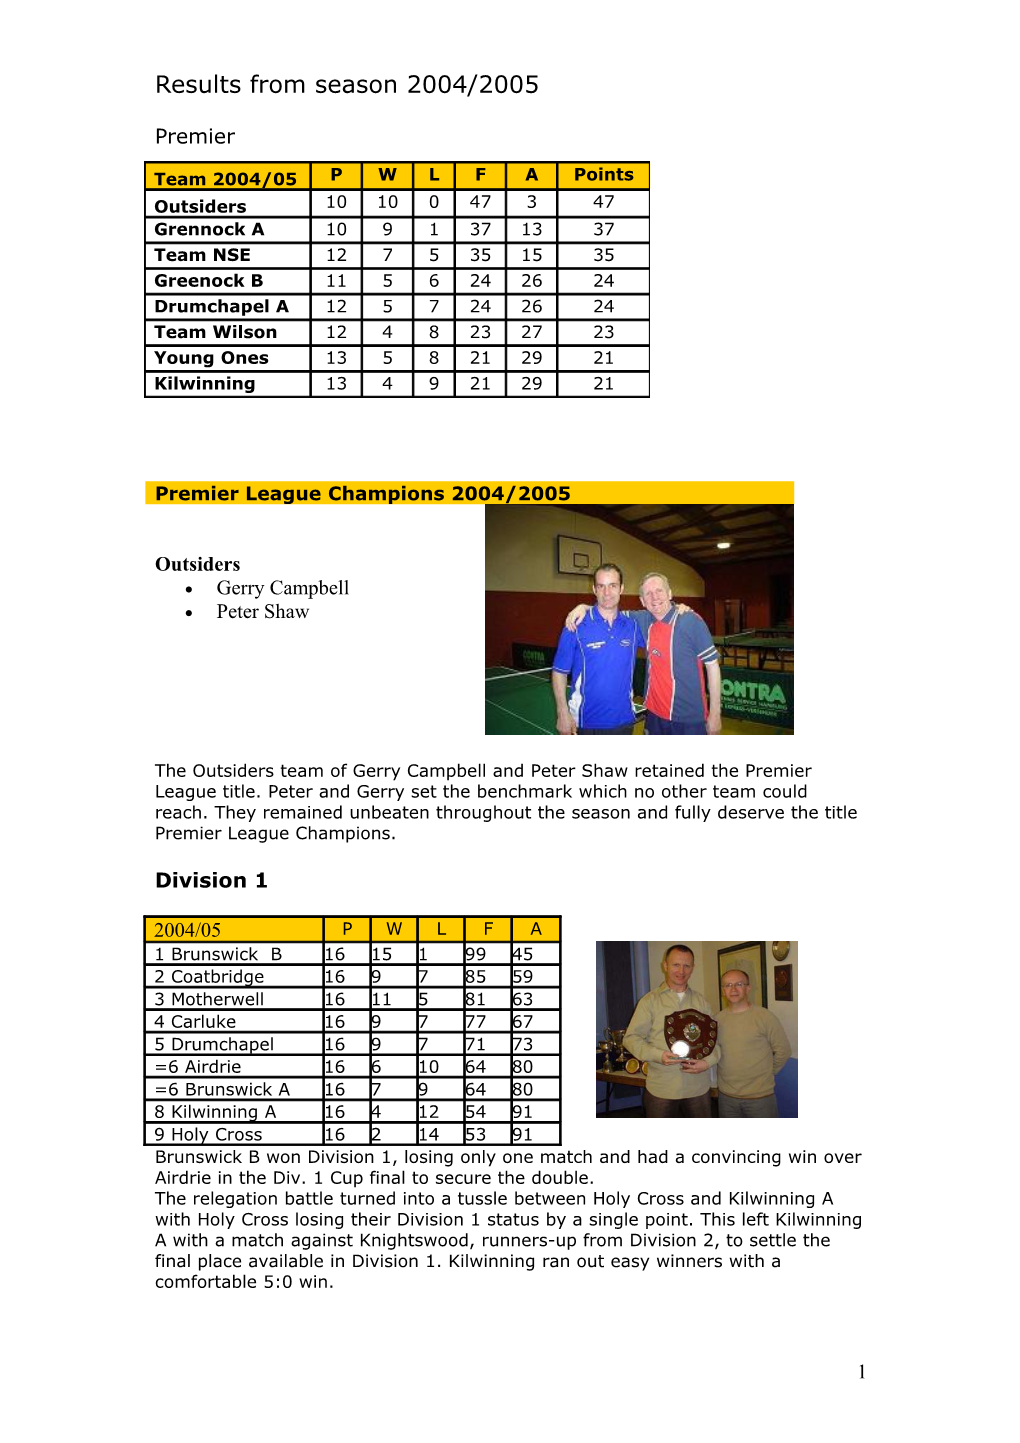 Results from Season 2004/2005